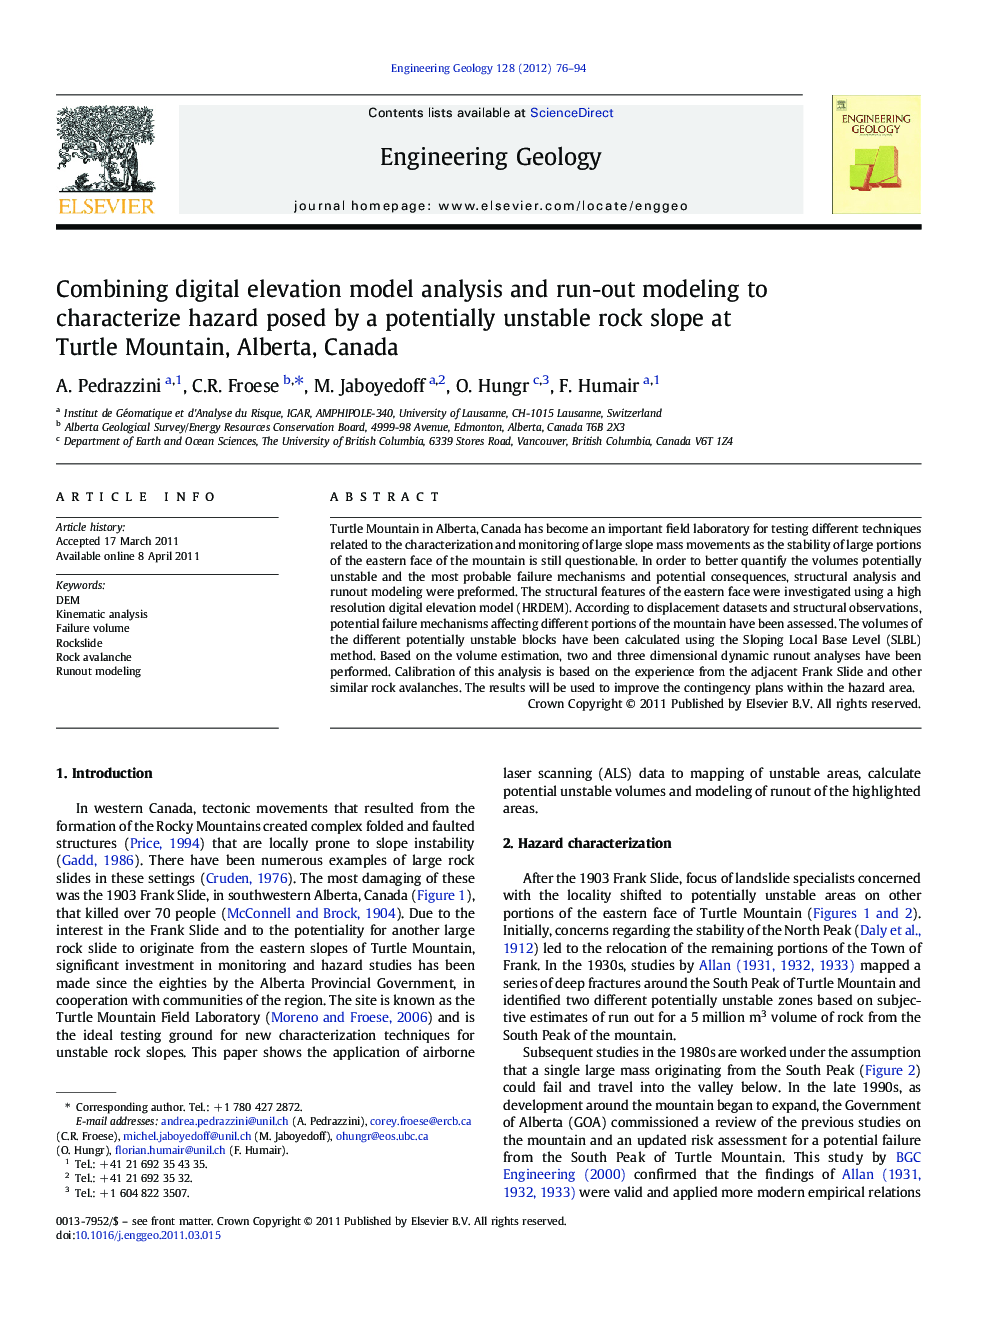 Combining digital elevation model analysis and run-out modeling to characterize hazard posed by a potentially unstable rock slope at Turtle Mountain, Alberta, Canada